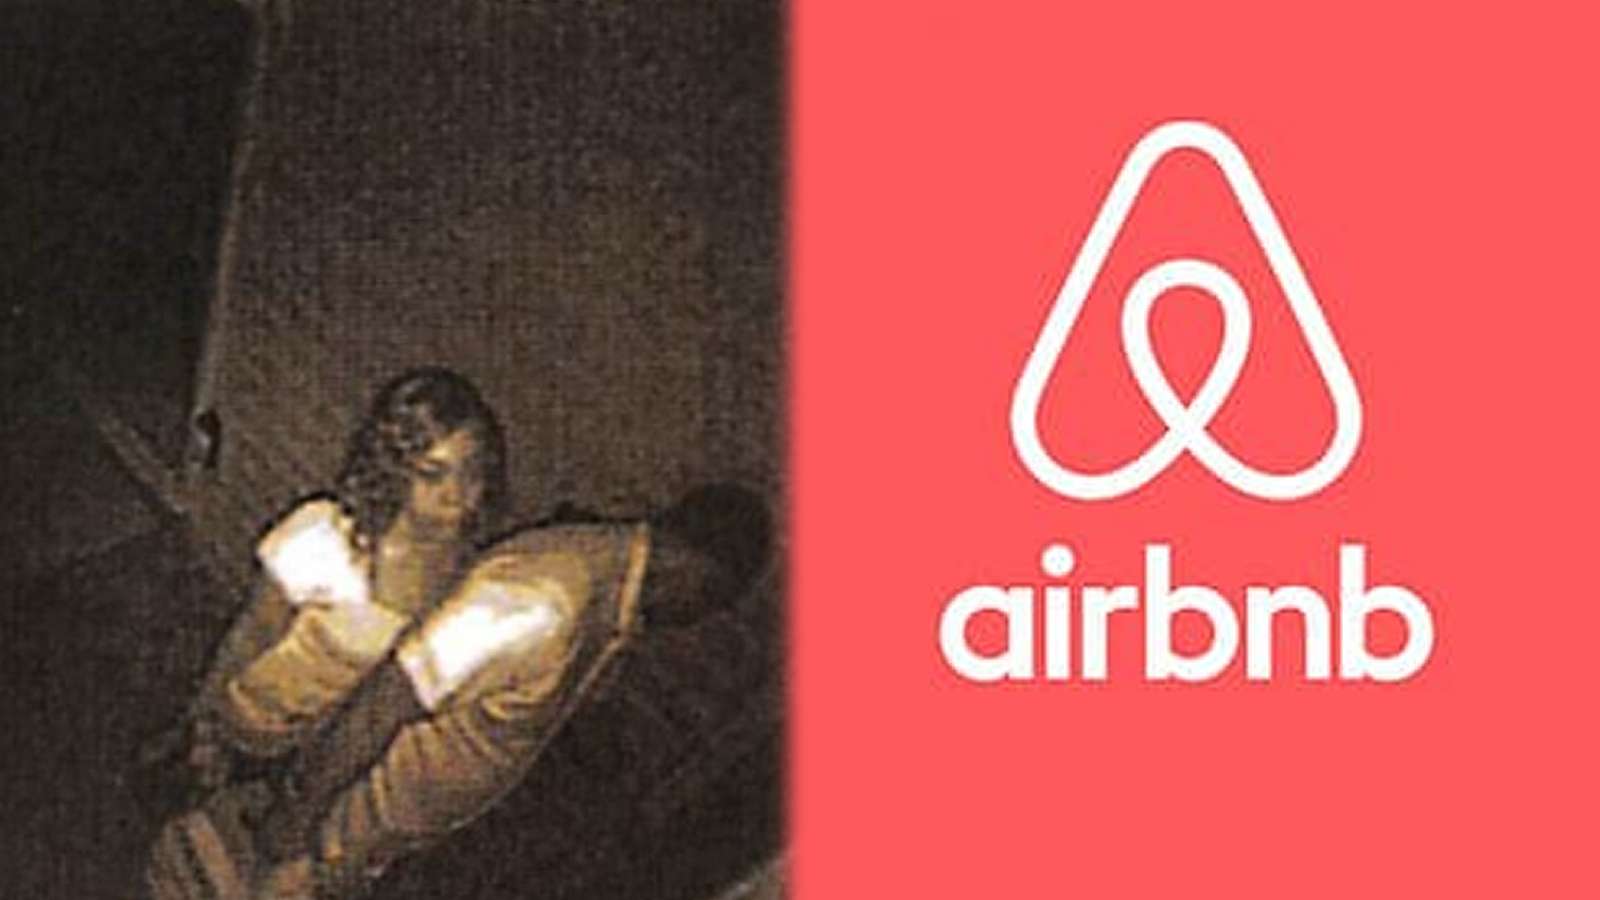 Man sues Airbnb host for sending his wife photos of him with another woman